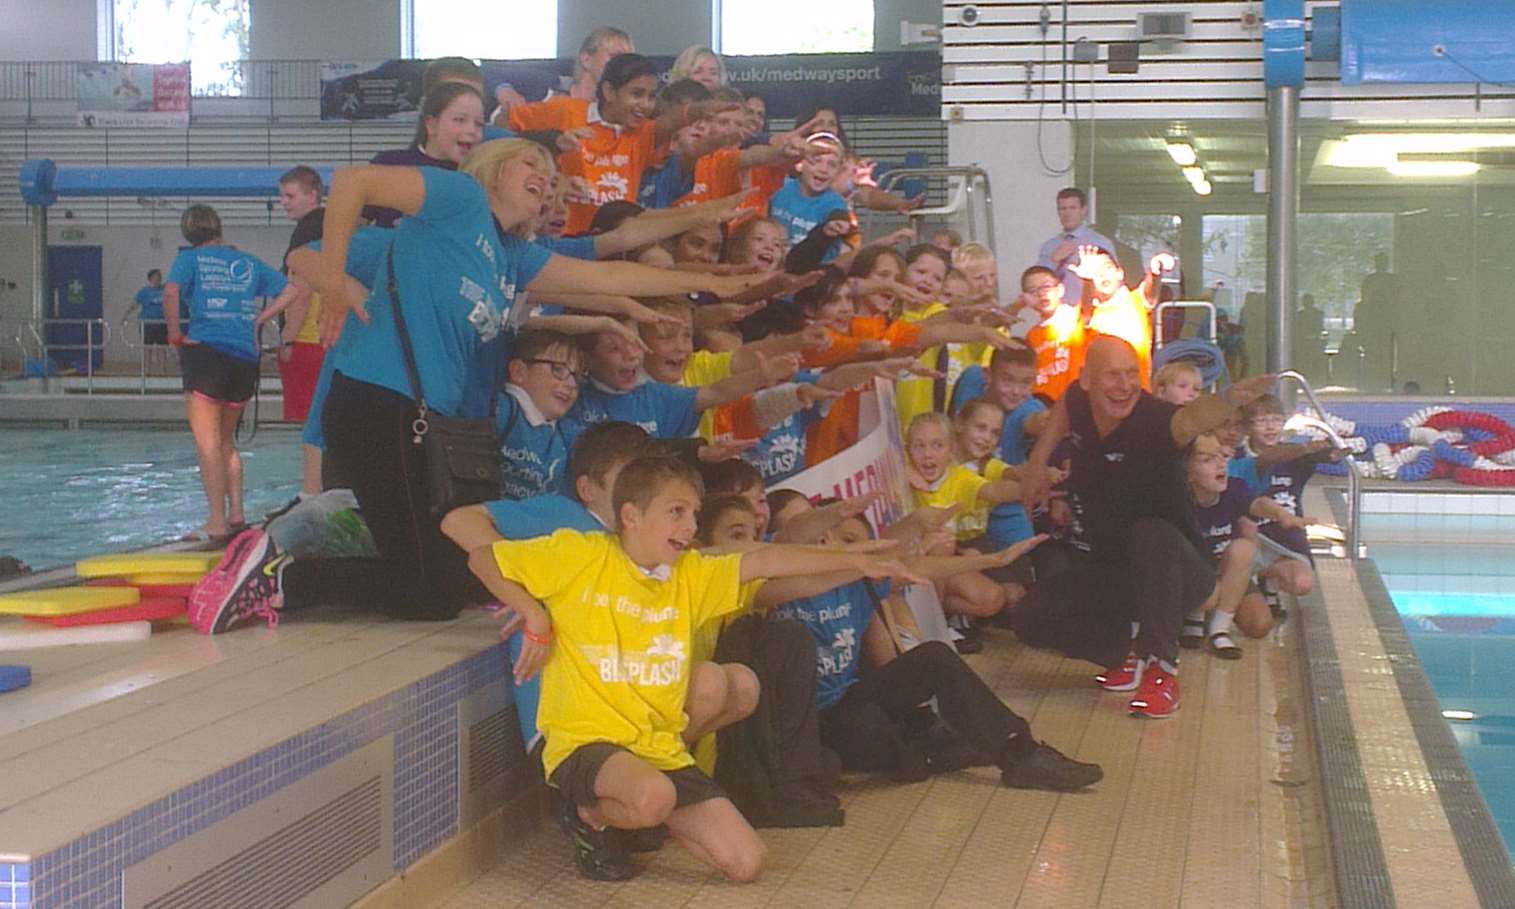 Olympic swimmer Duncan Goodhew launches the second Big Splash at Medway Park